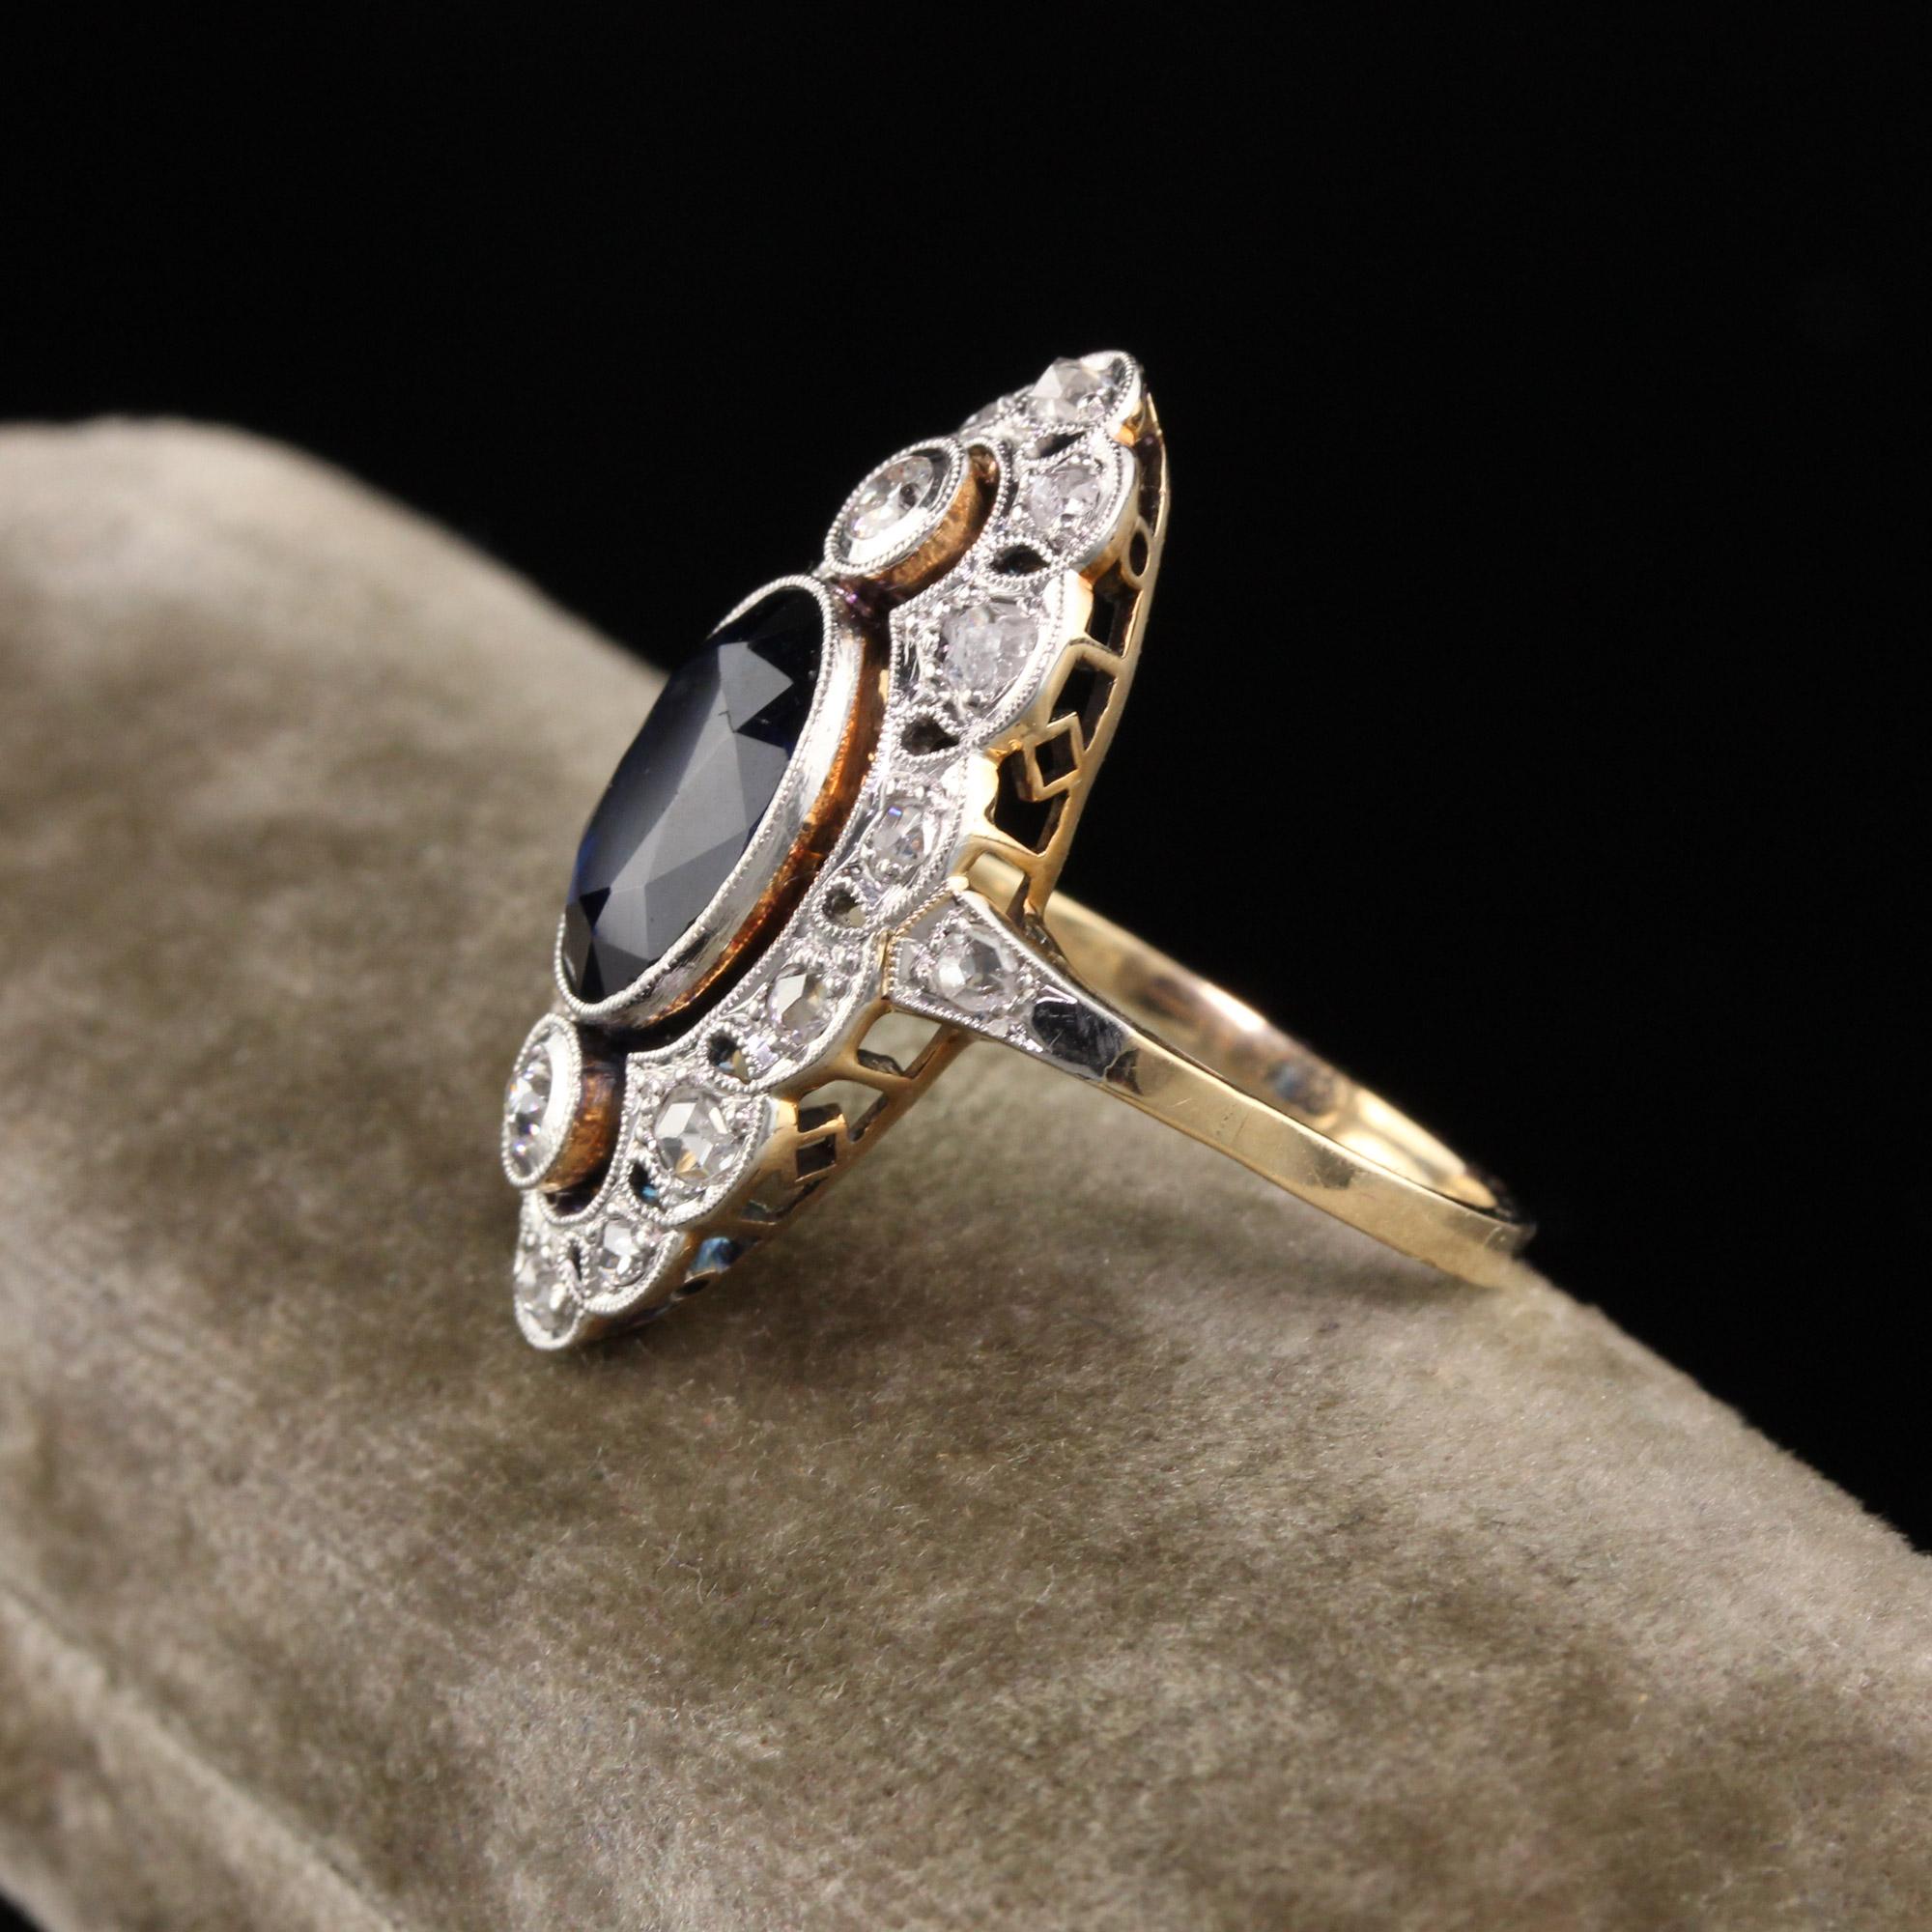 Beautiful Antique Art Deco 14K Yellow Gold and Platinum Diamond and Sapphire Ring. This gorgeous ring features an approximate 3 ct oval natural sapphire in the center of an incredible mounting. The sapphire is on the darker side of color and is